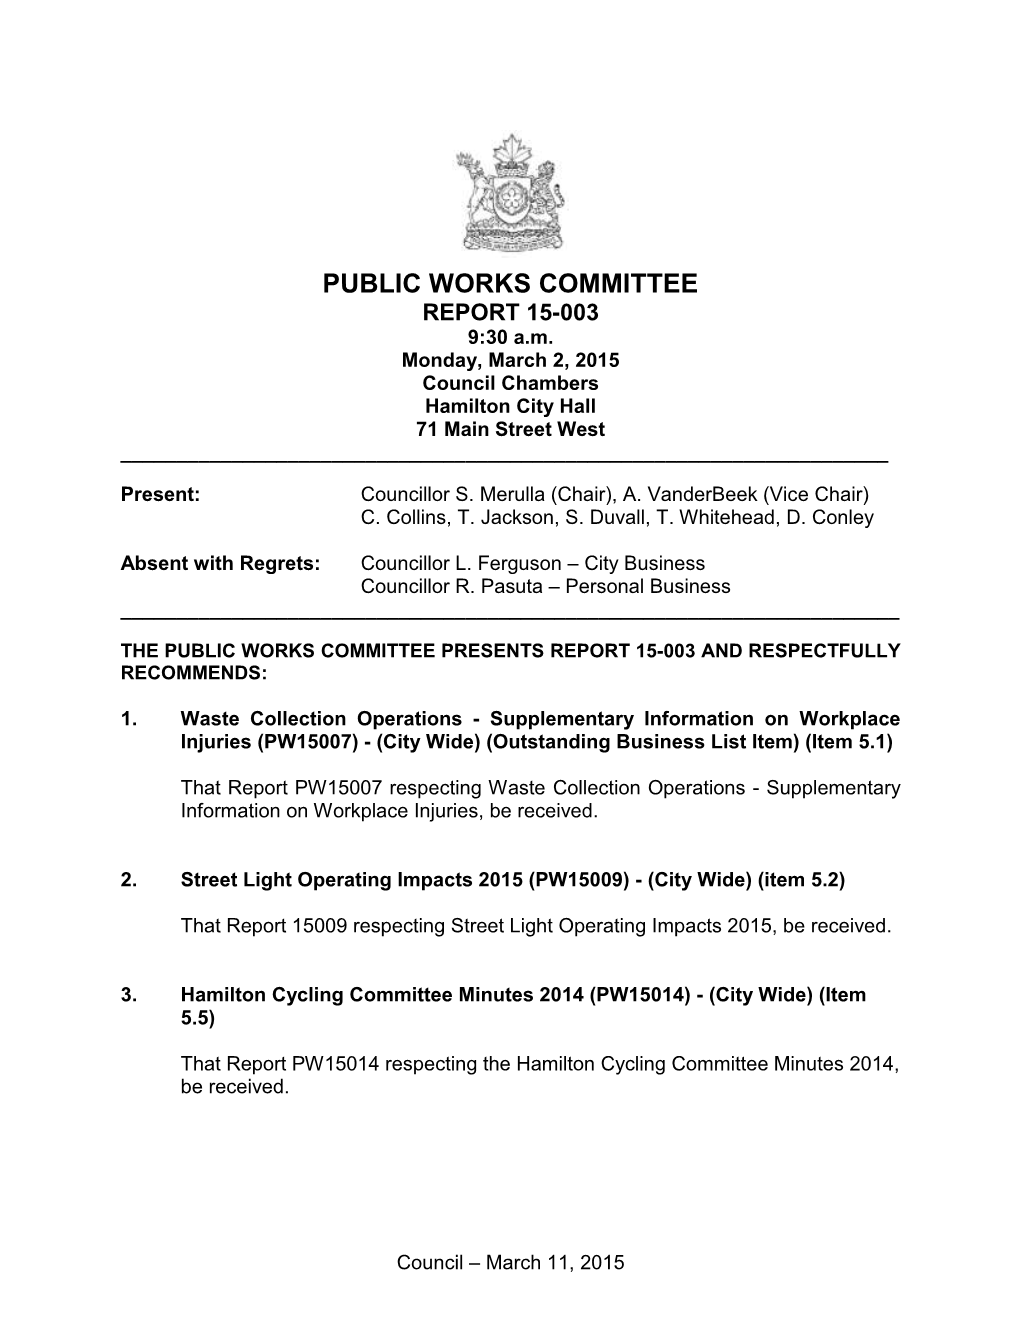 March 2, 2015 Public Works Committee Report 15-003